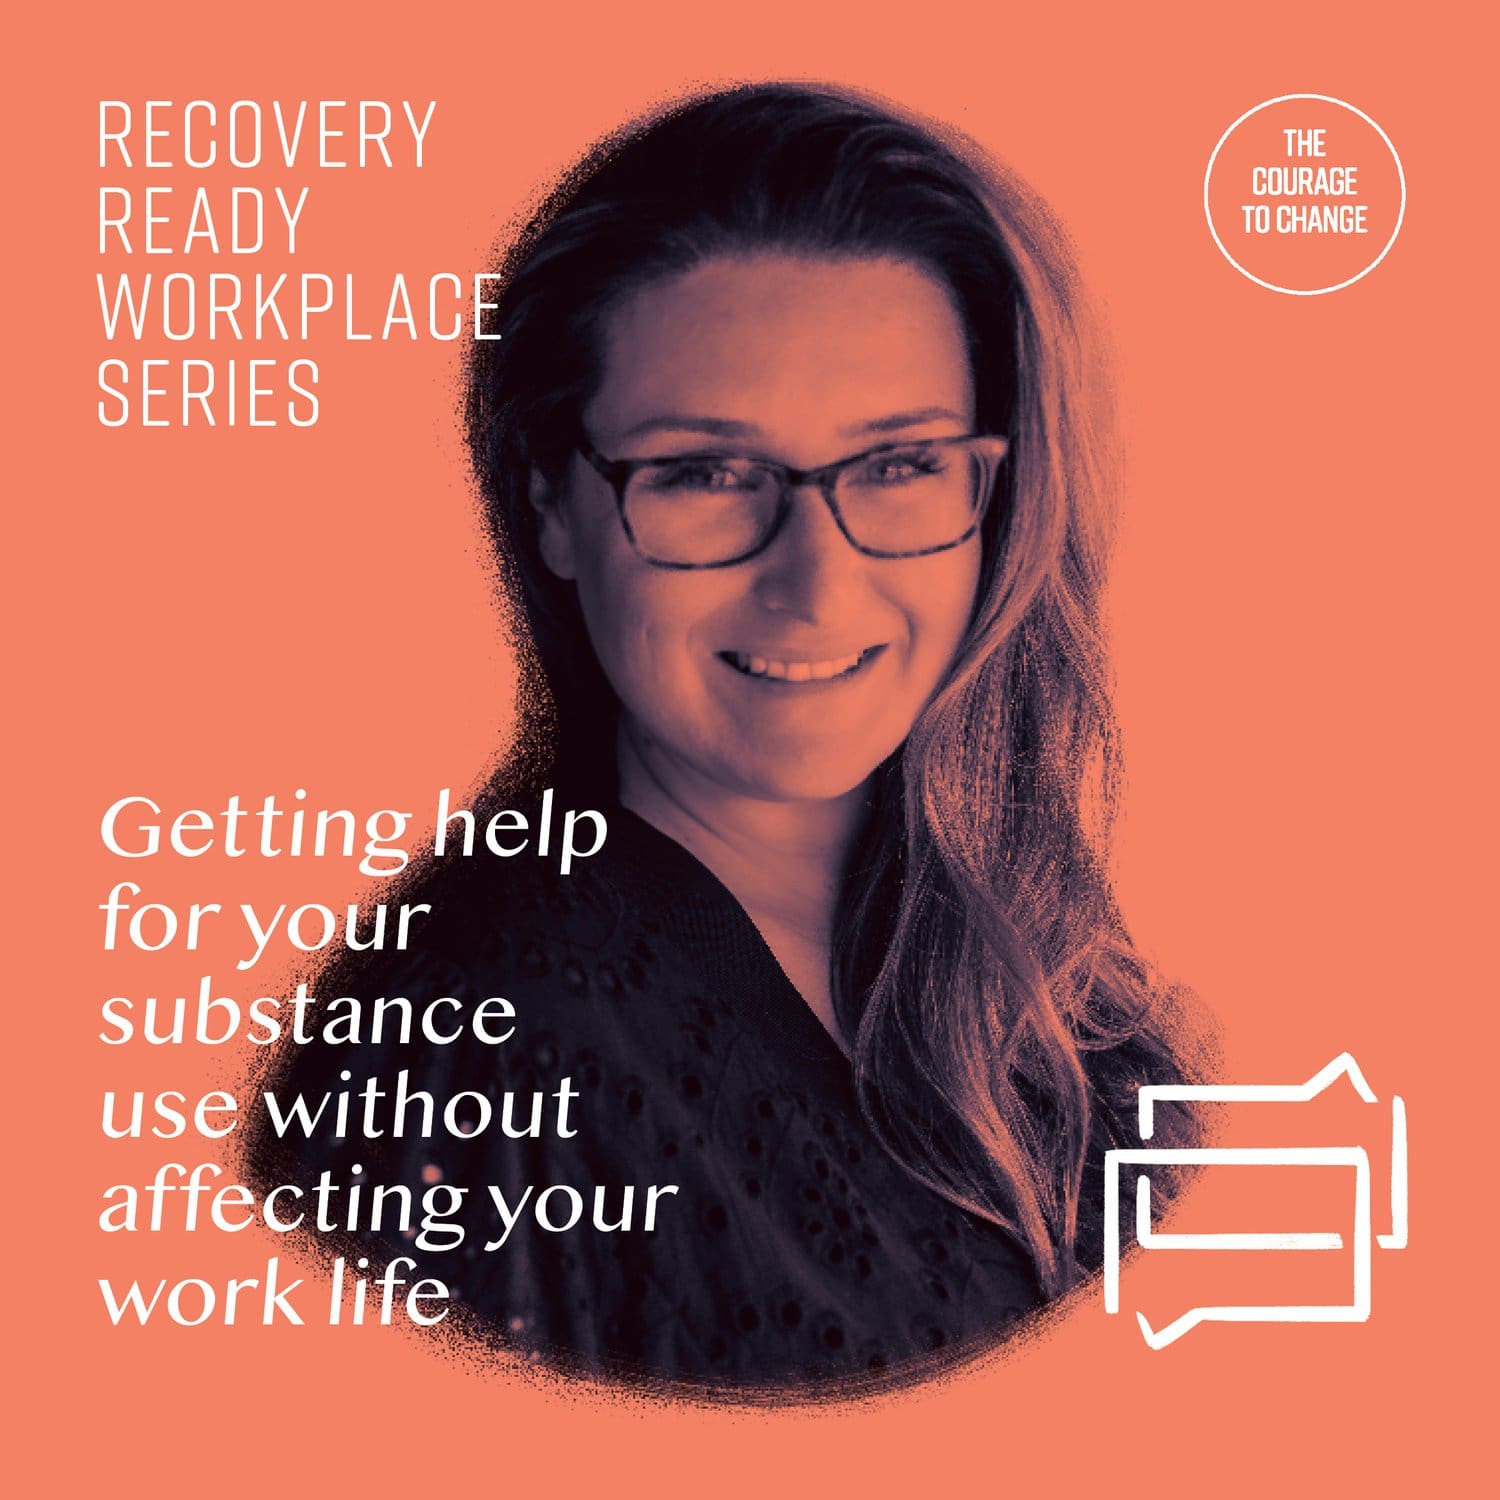 Recovery Ready Workplace: Getting Help Your Your Substance Use Without Affecting Your Work Life